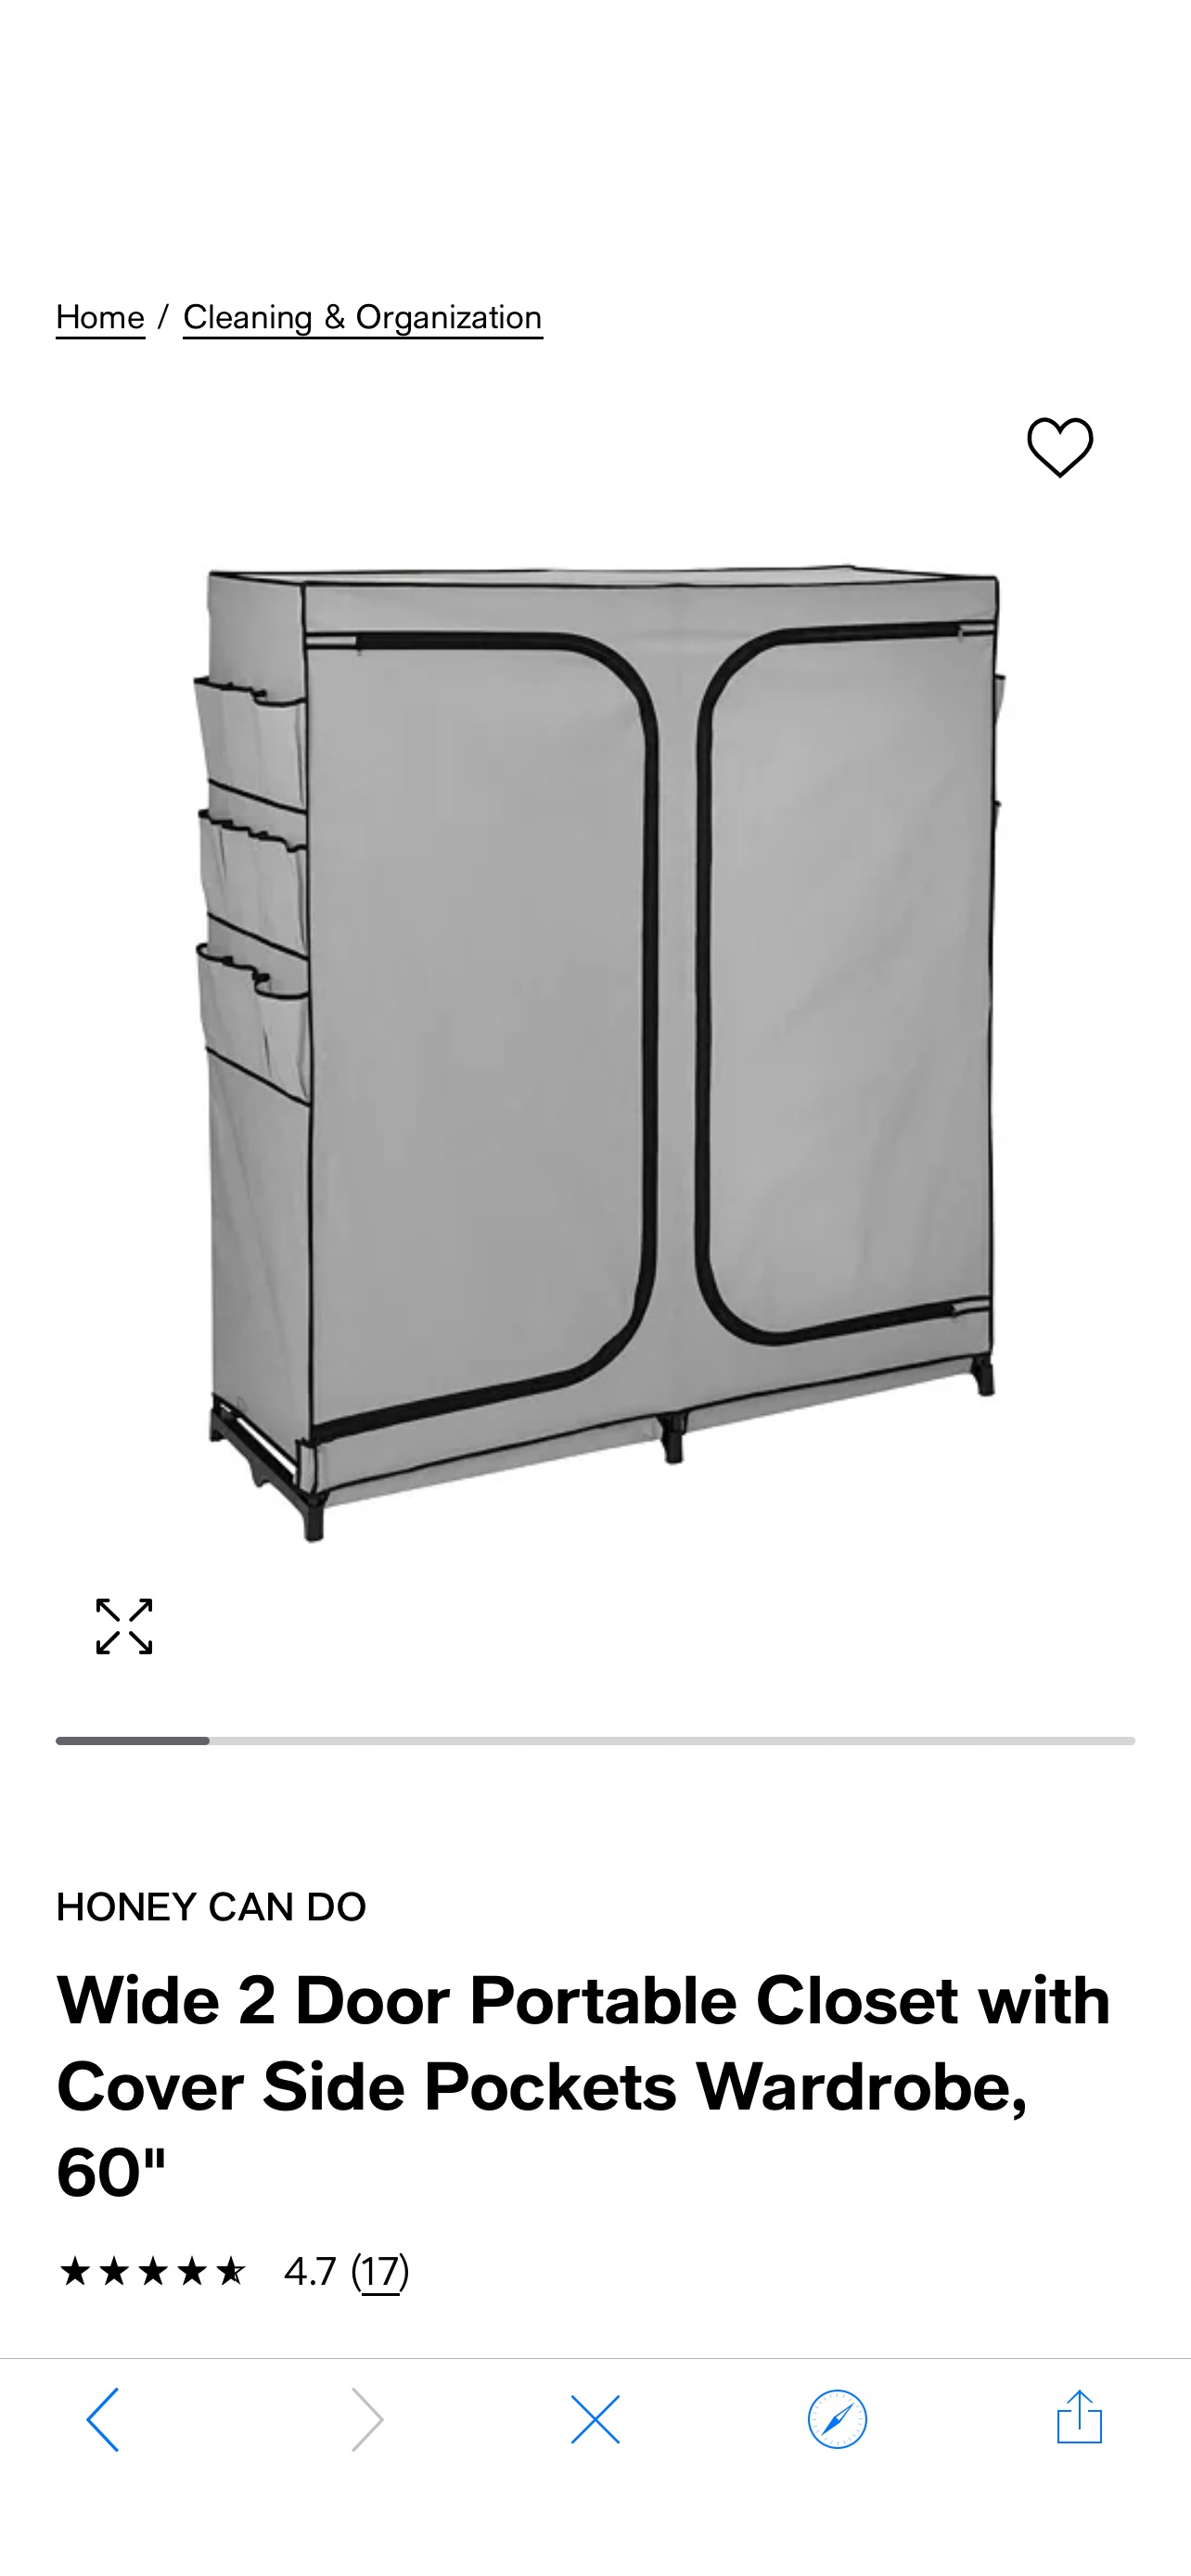 Honey Can Do Wide 2 Door Portable Closet with Cover Side Pockets Wardrobe, 60" & Reviews - Cleaning & Organization - Home - Macy's